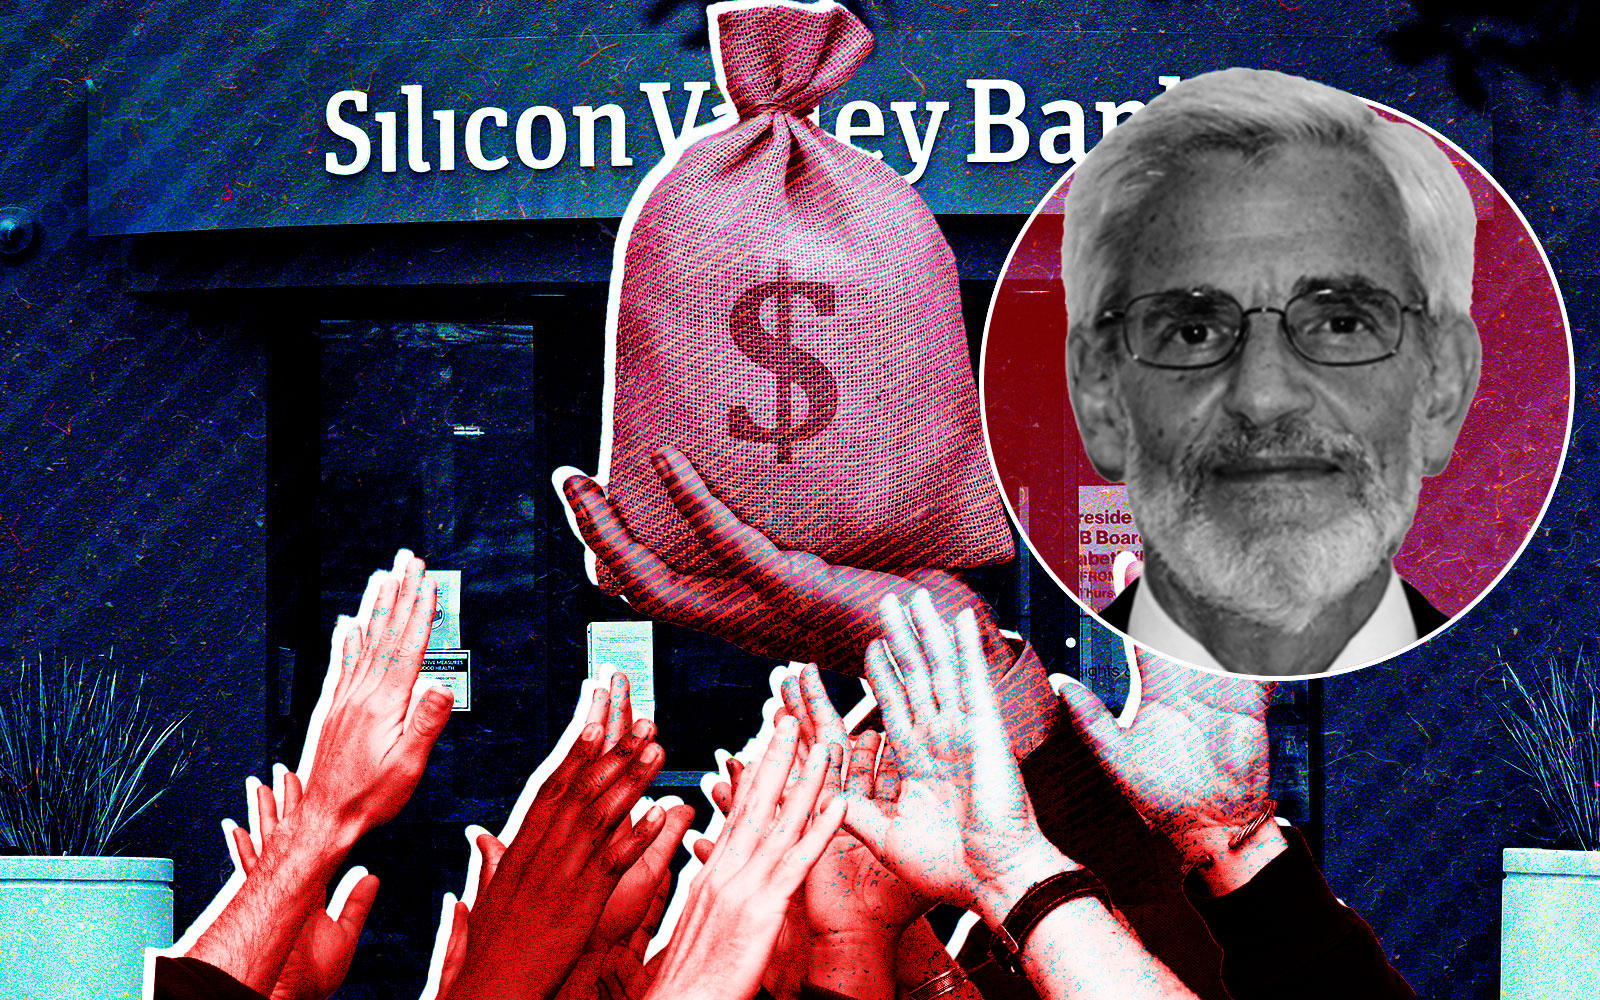 Judge approves owner of Silicon Valley Bank to spend $100M